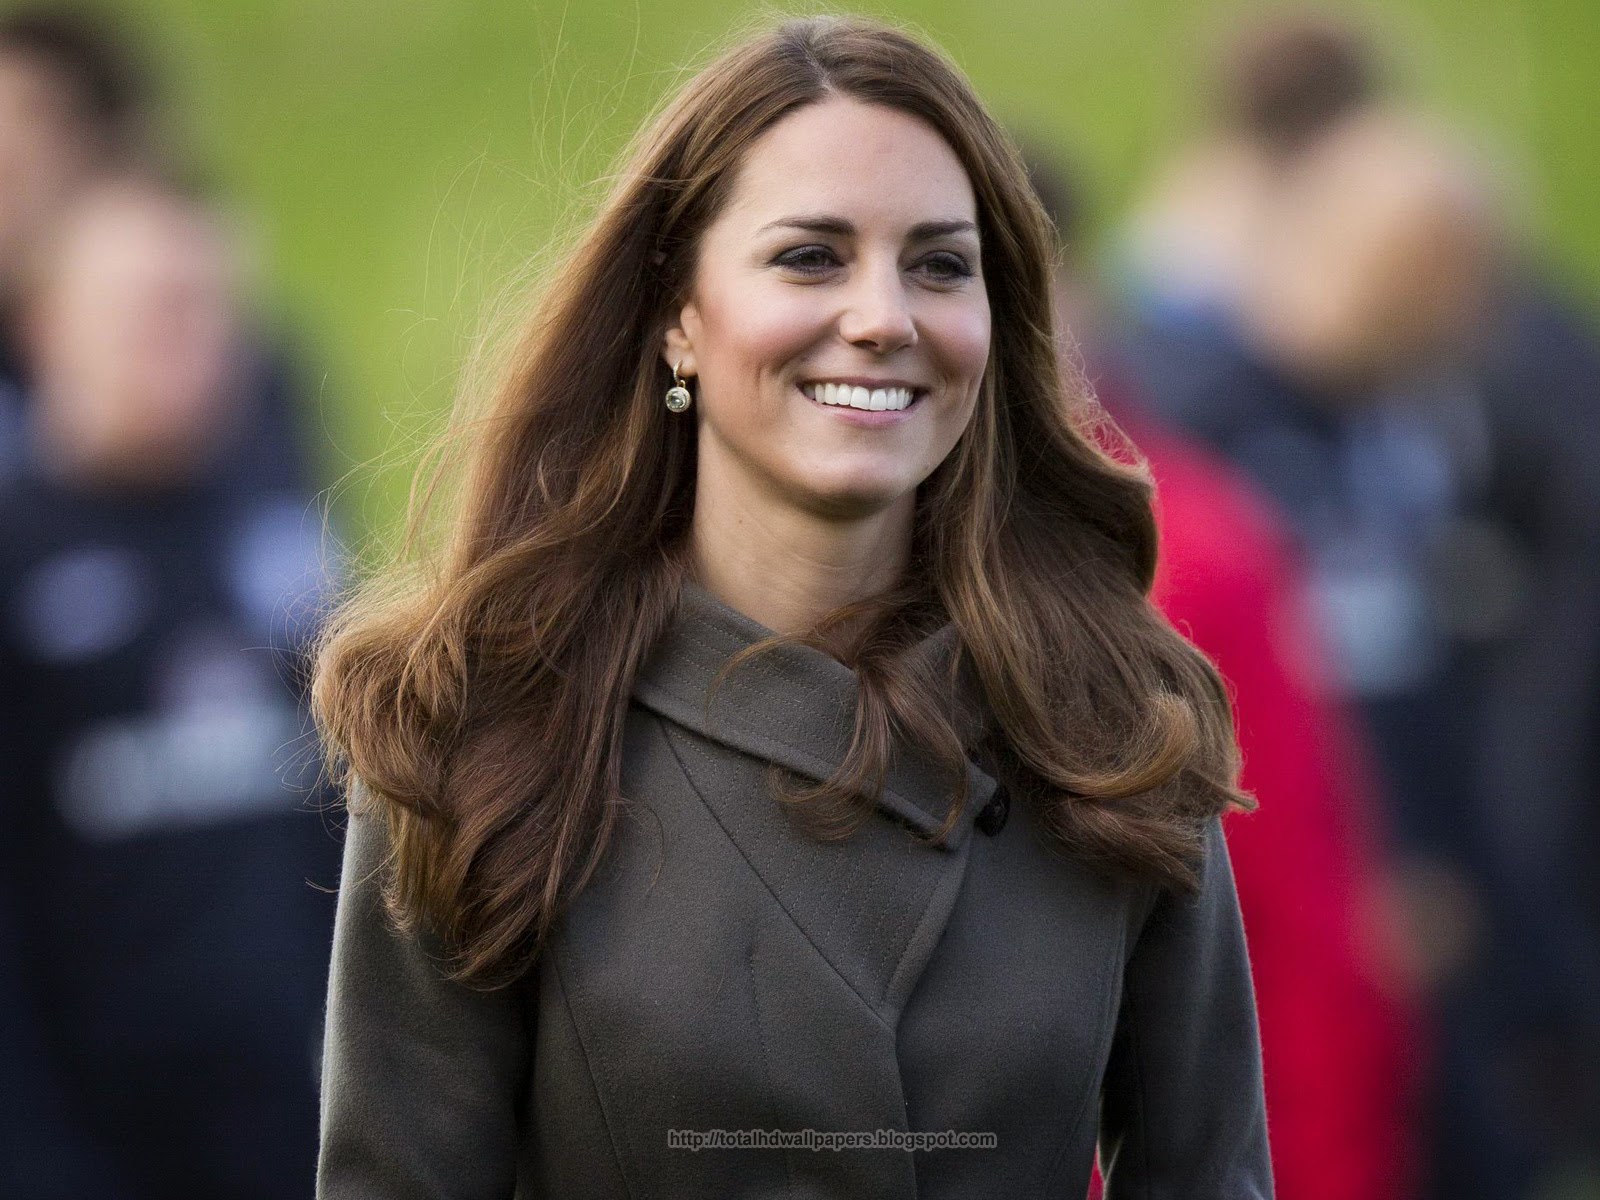 Kate Middleton's hd wallpapers ~ HD WALLPAPERS